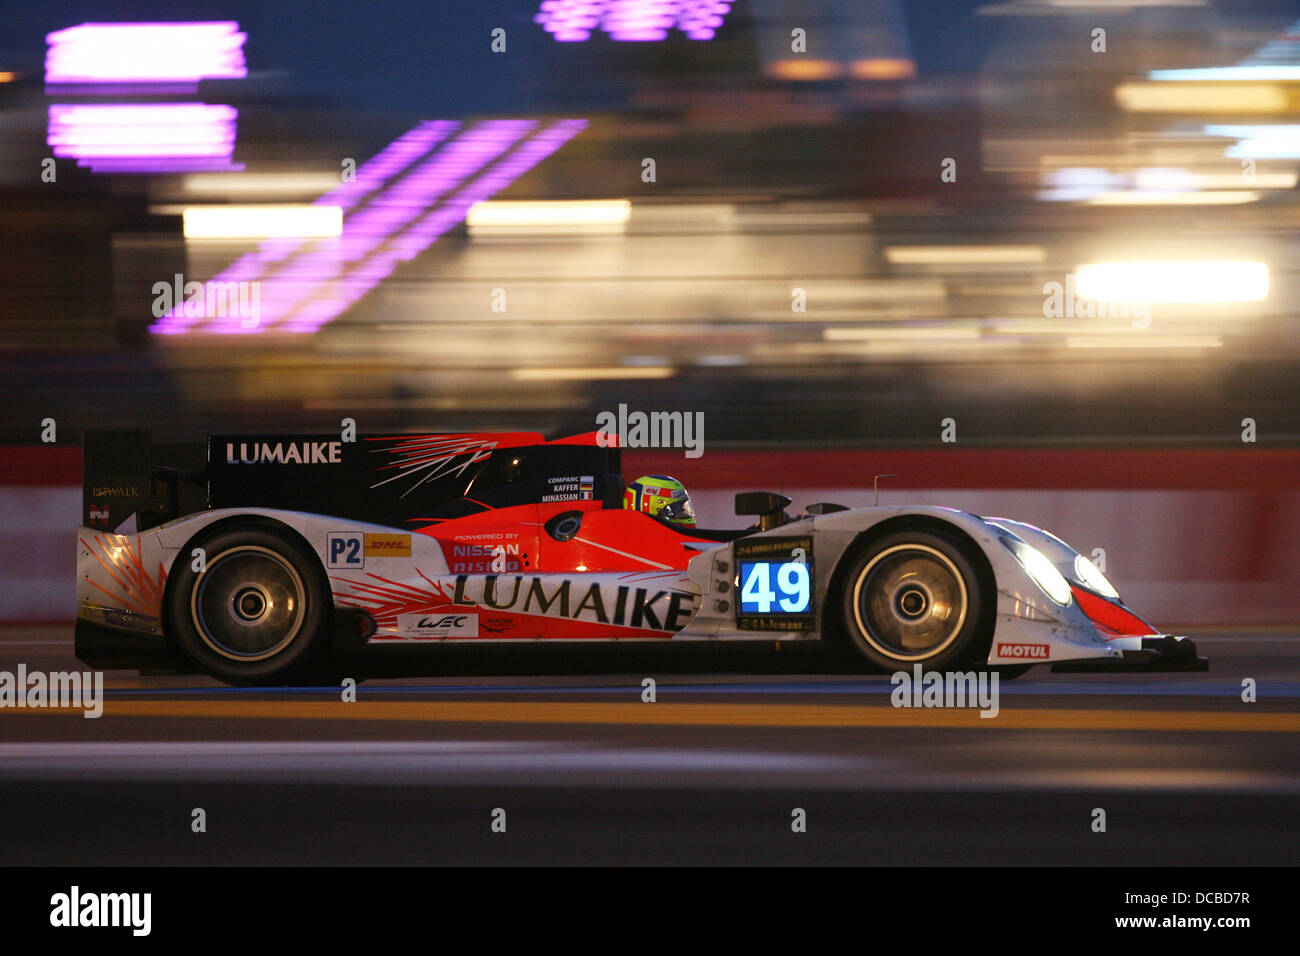 Night racing scene at Le Mans 24 Hours, 2013 Stock Photo